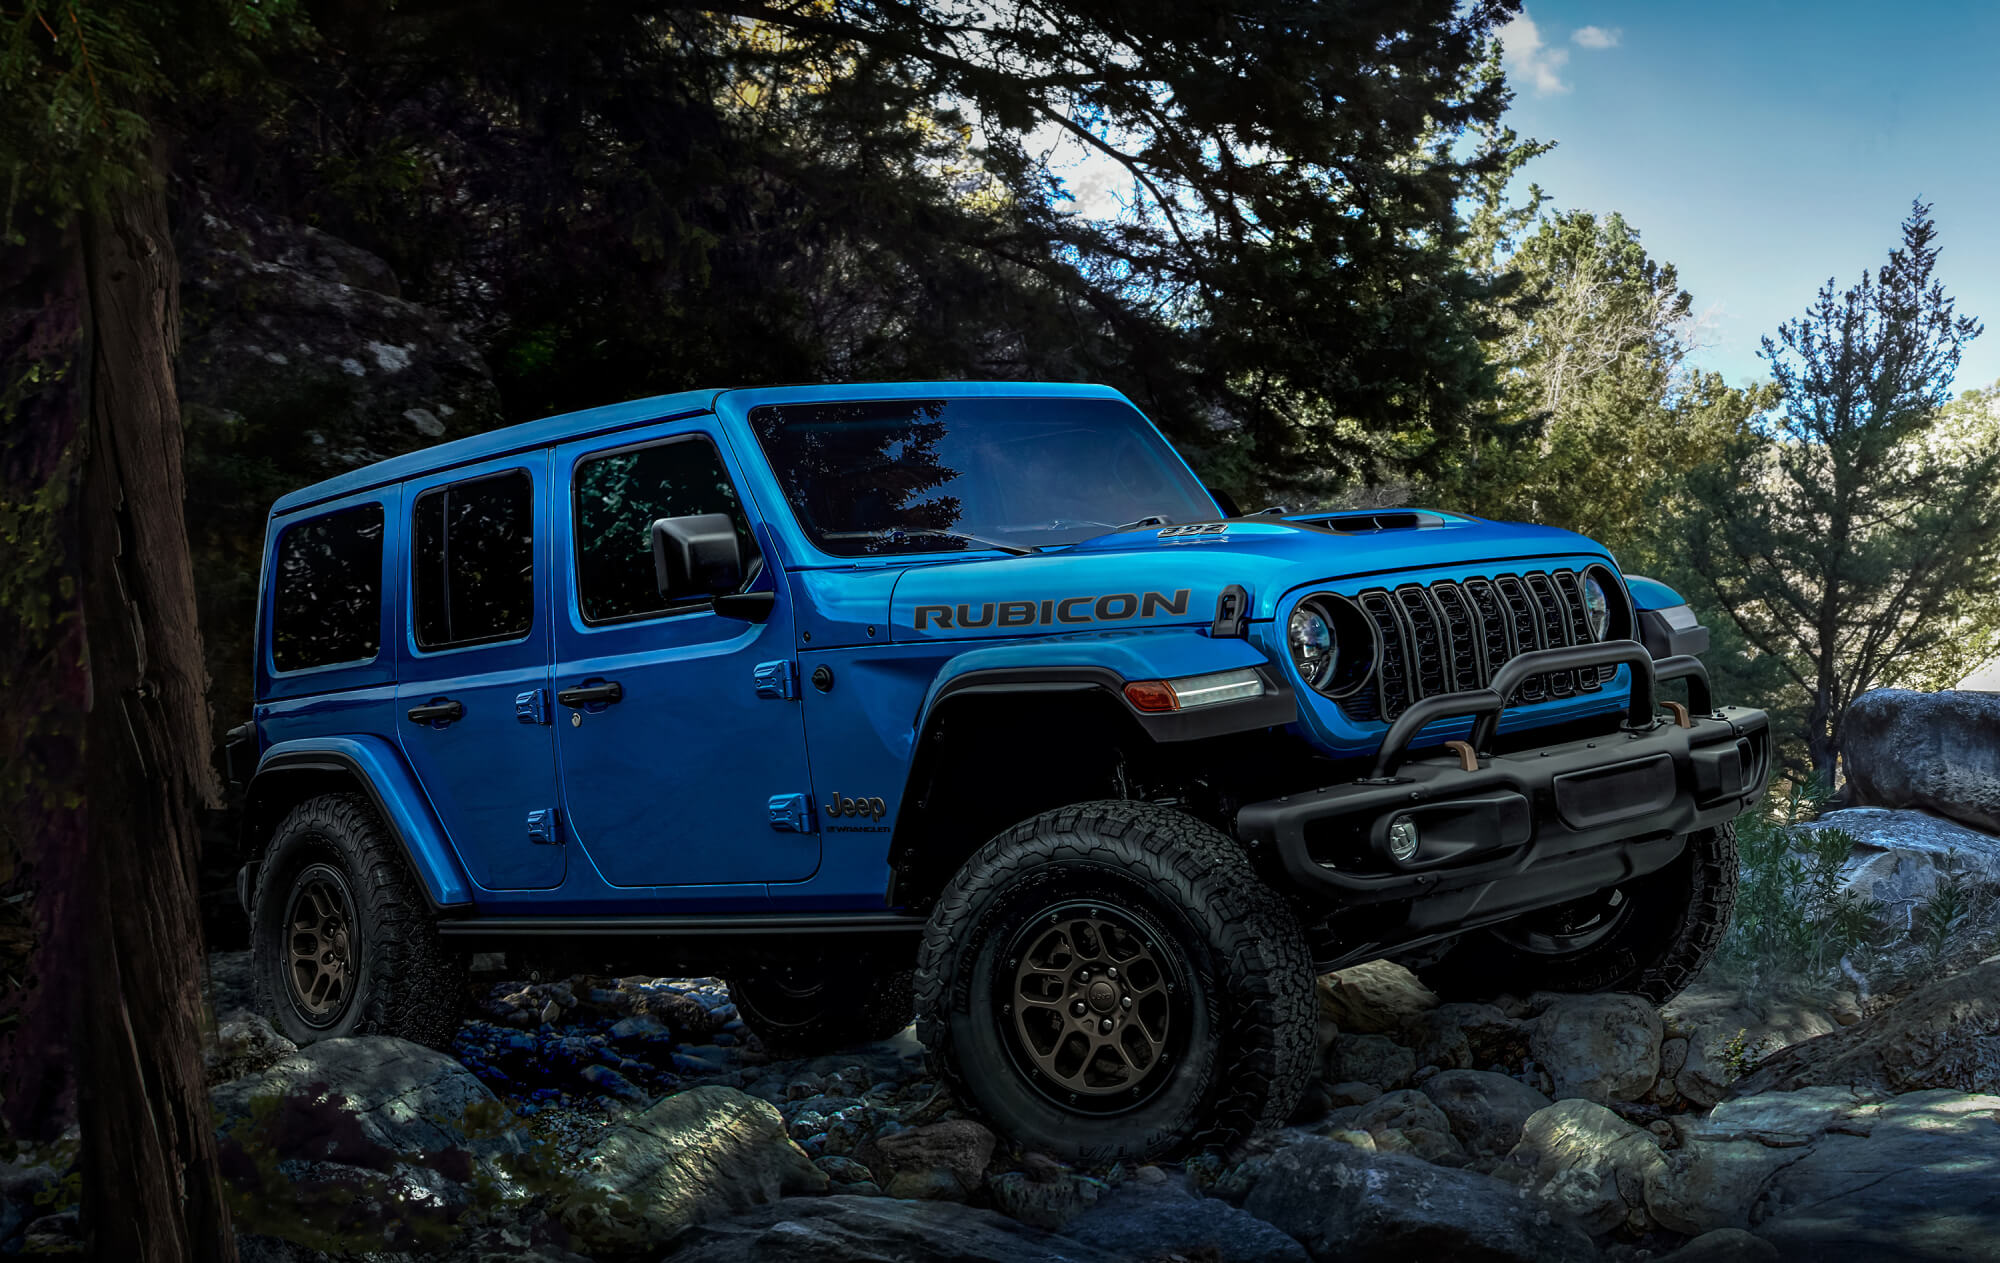 A blue Wrangler Rubicon 392 sitting atop rocks in a forest.